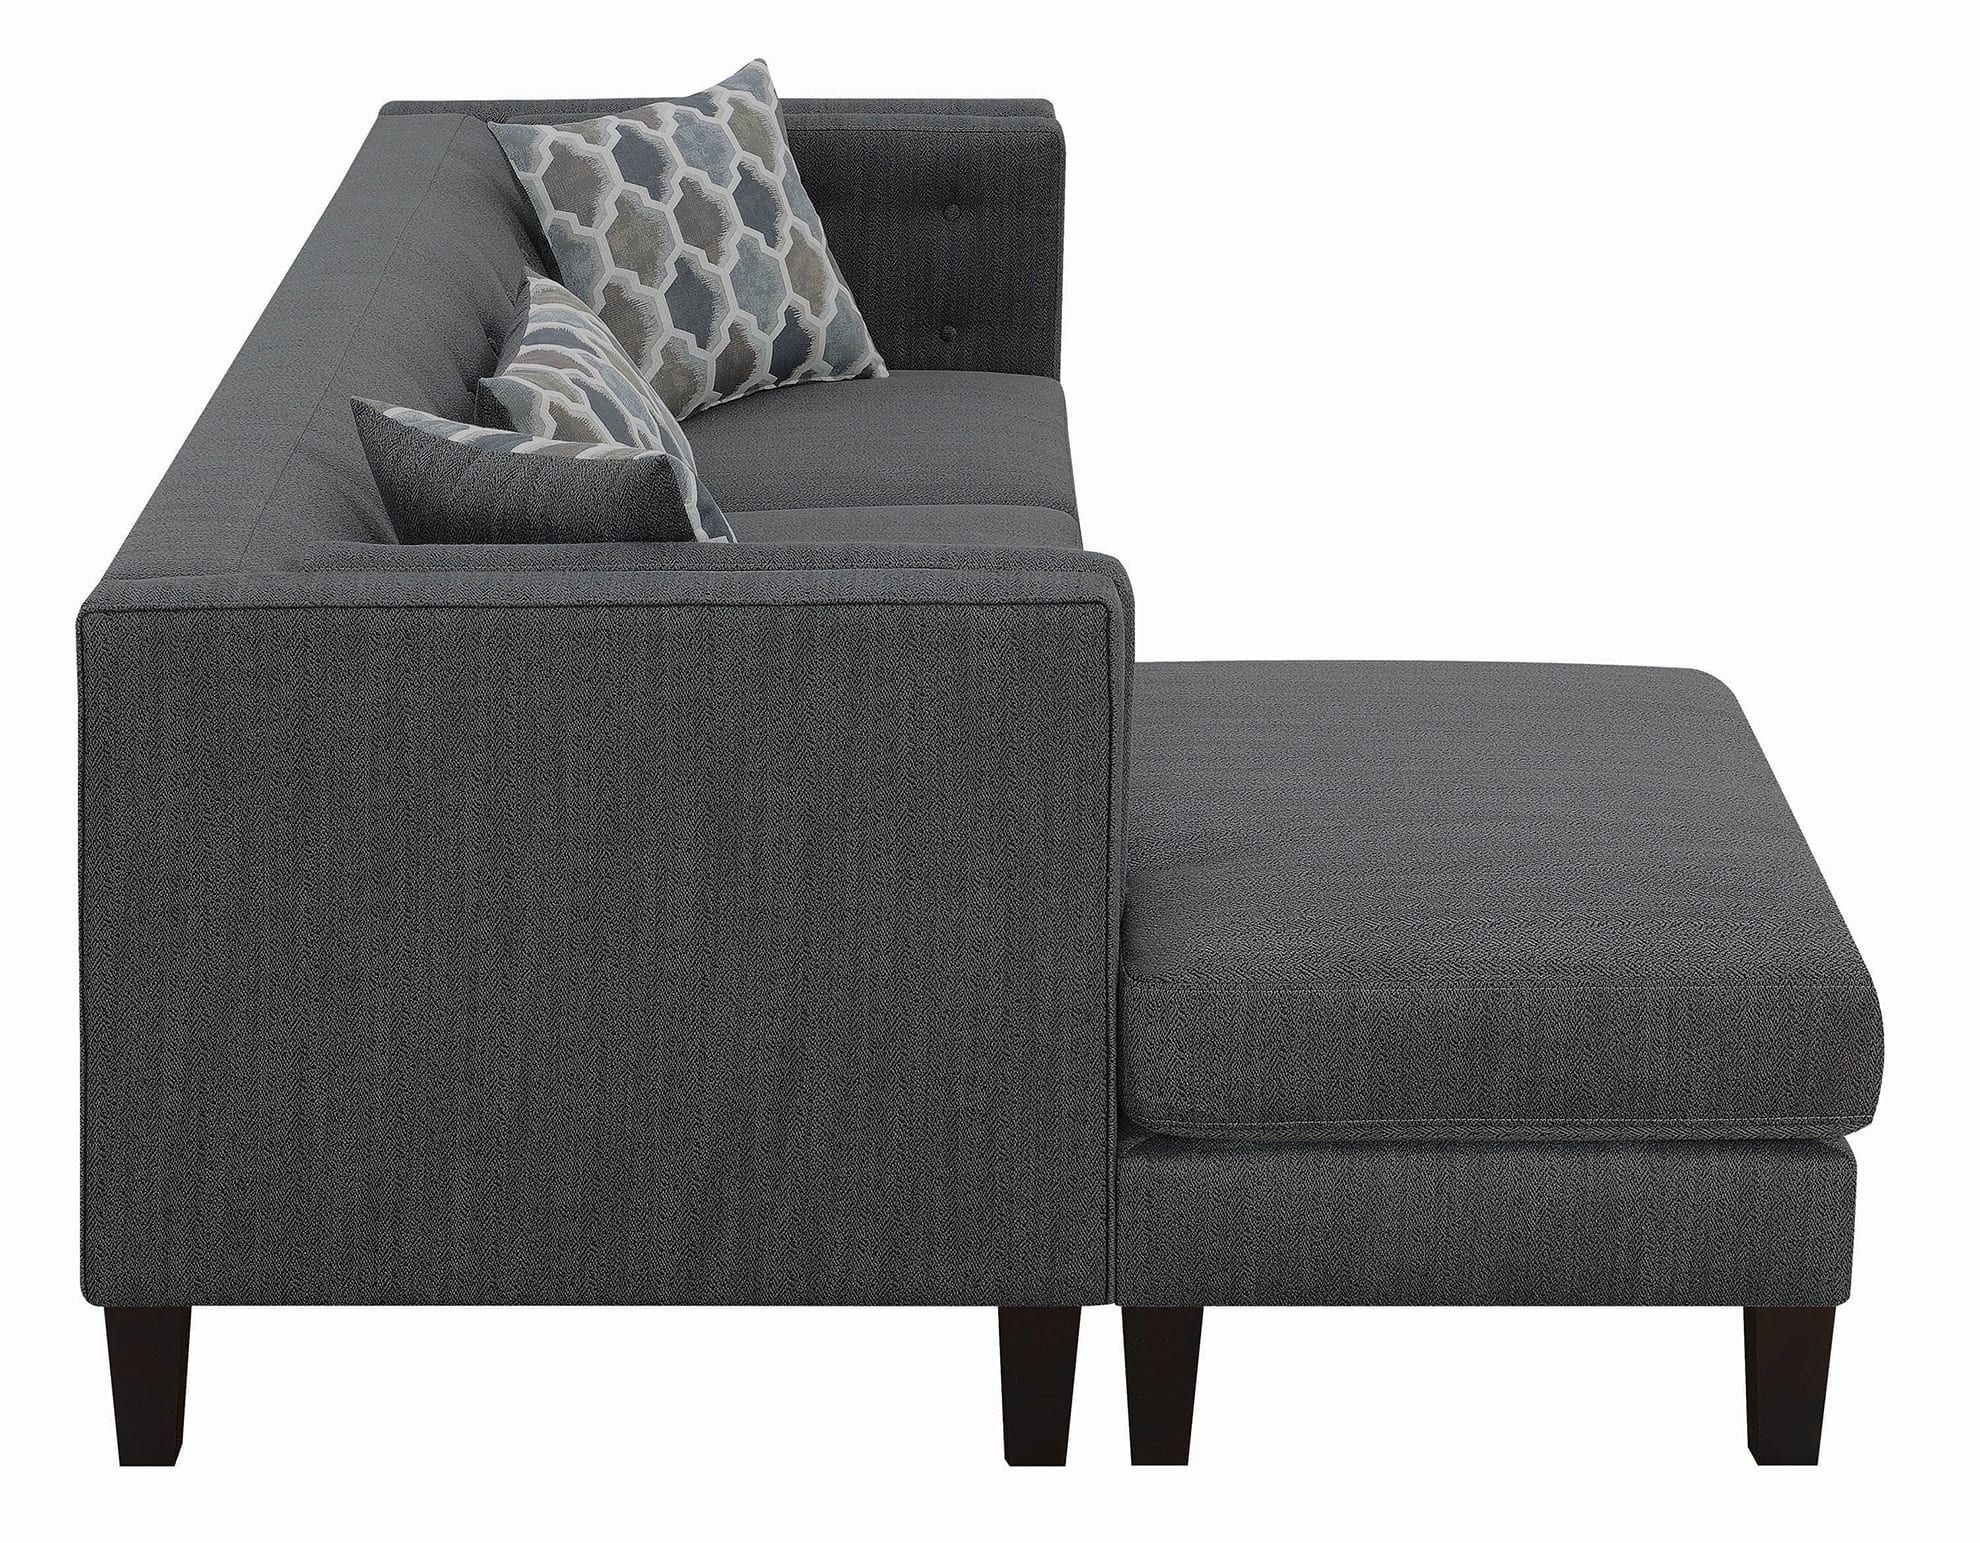 Sawyer Contemporary Dusty Blue Sectional | Quality With Brayson Chaise Sectional Sofas Dusty Blue (View 8 of 15)